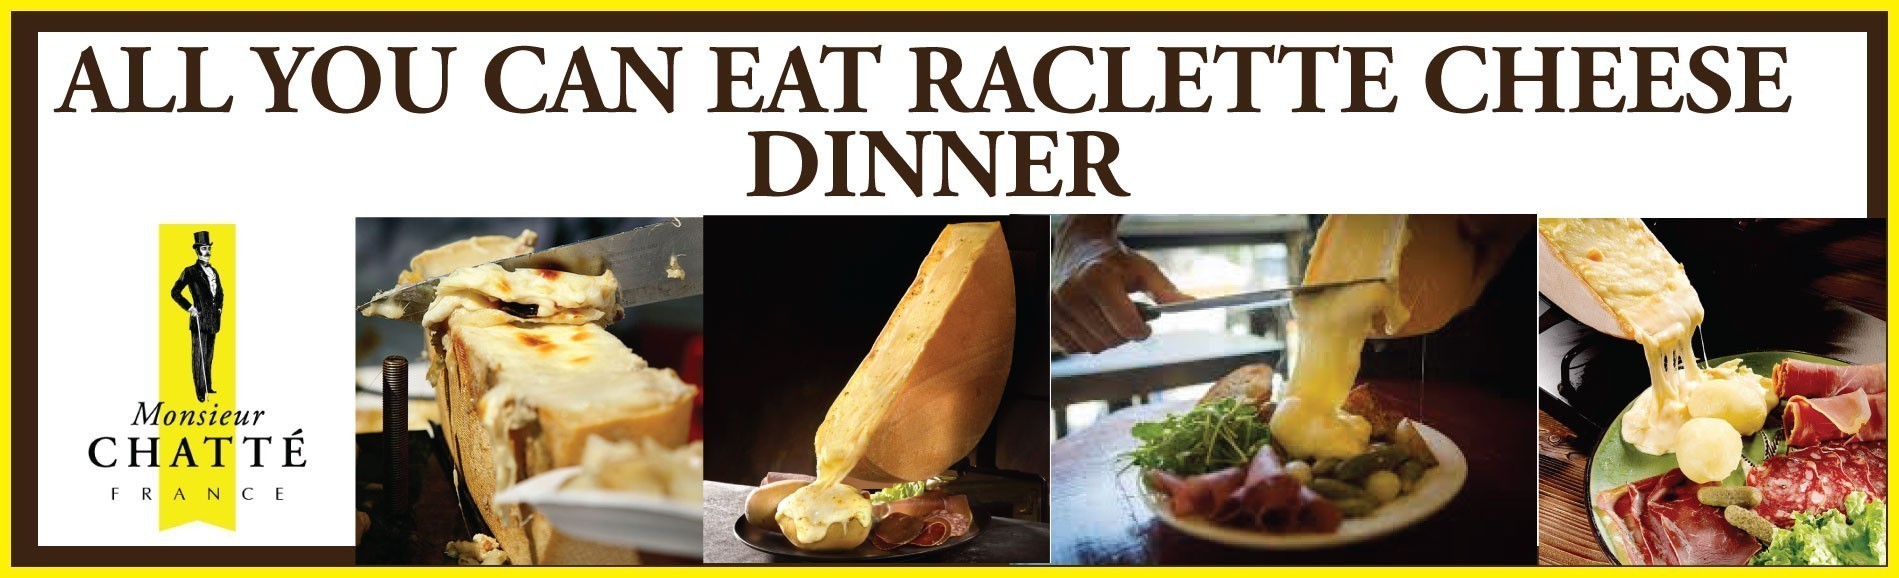 All you can eat Raclette event - 6.30pm to 9.30pm